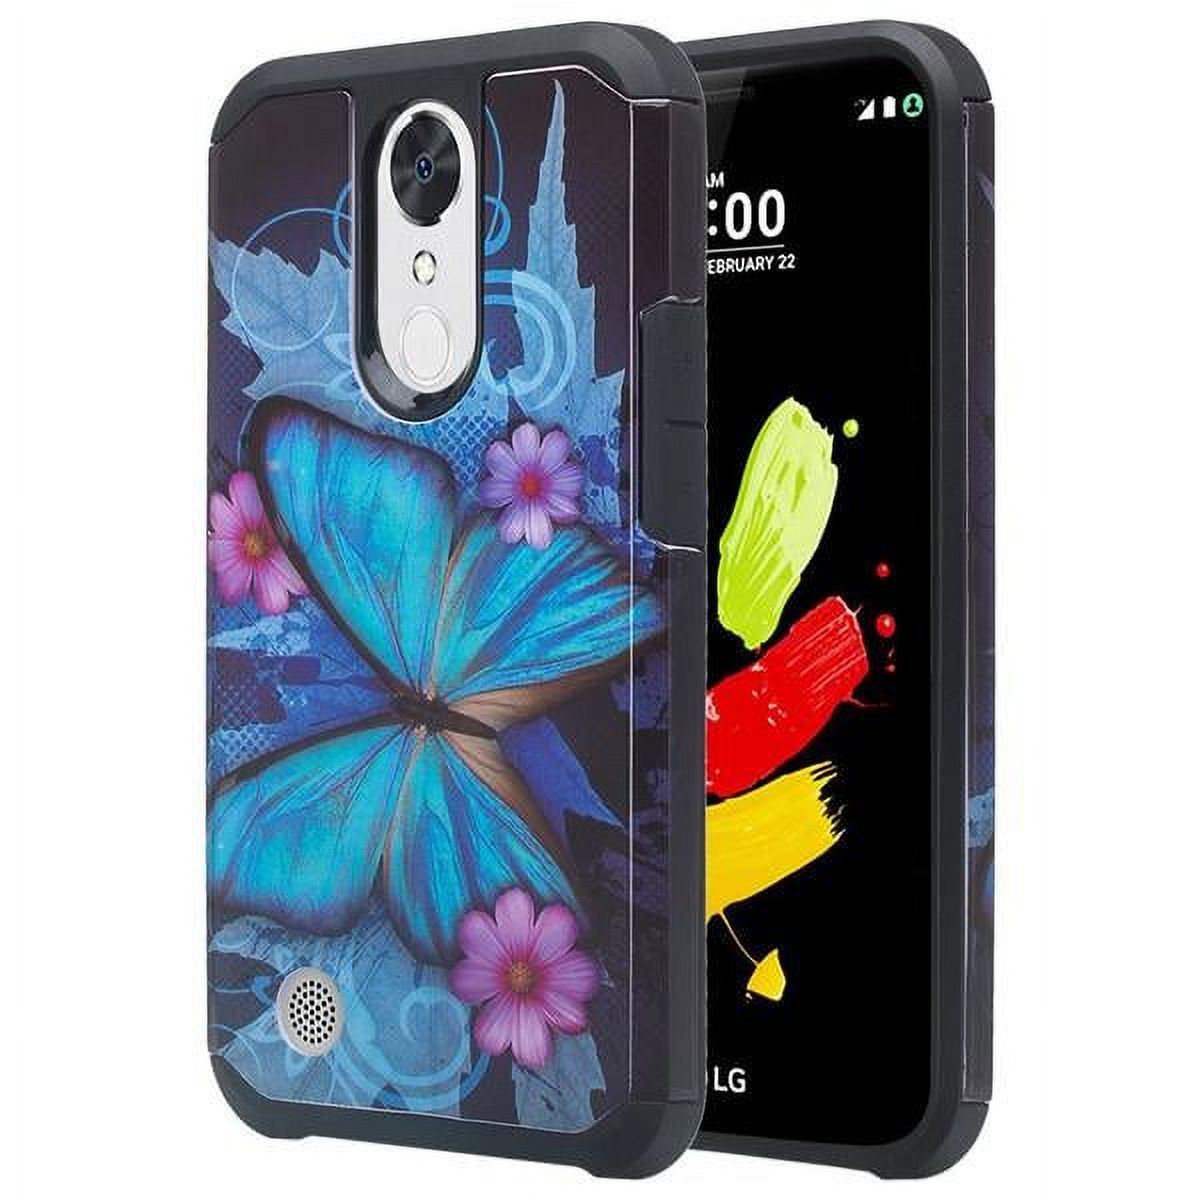 LG Risio 3 Case,LG Rebel 3 LTE Case (L157BL), LG Fortune 2 Case, LG Zone 4 Case, LG K8 2018 Case Protective Hybrid Diamond Soft Silicone Phone Case Cover Hard Case - Blue Butterfly - image 2 of 4